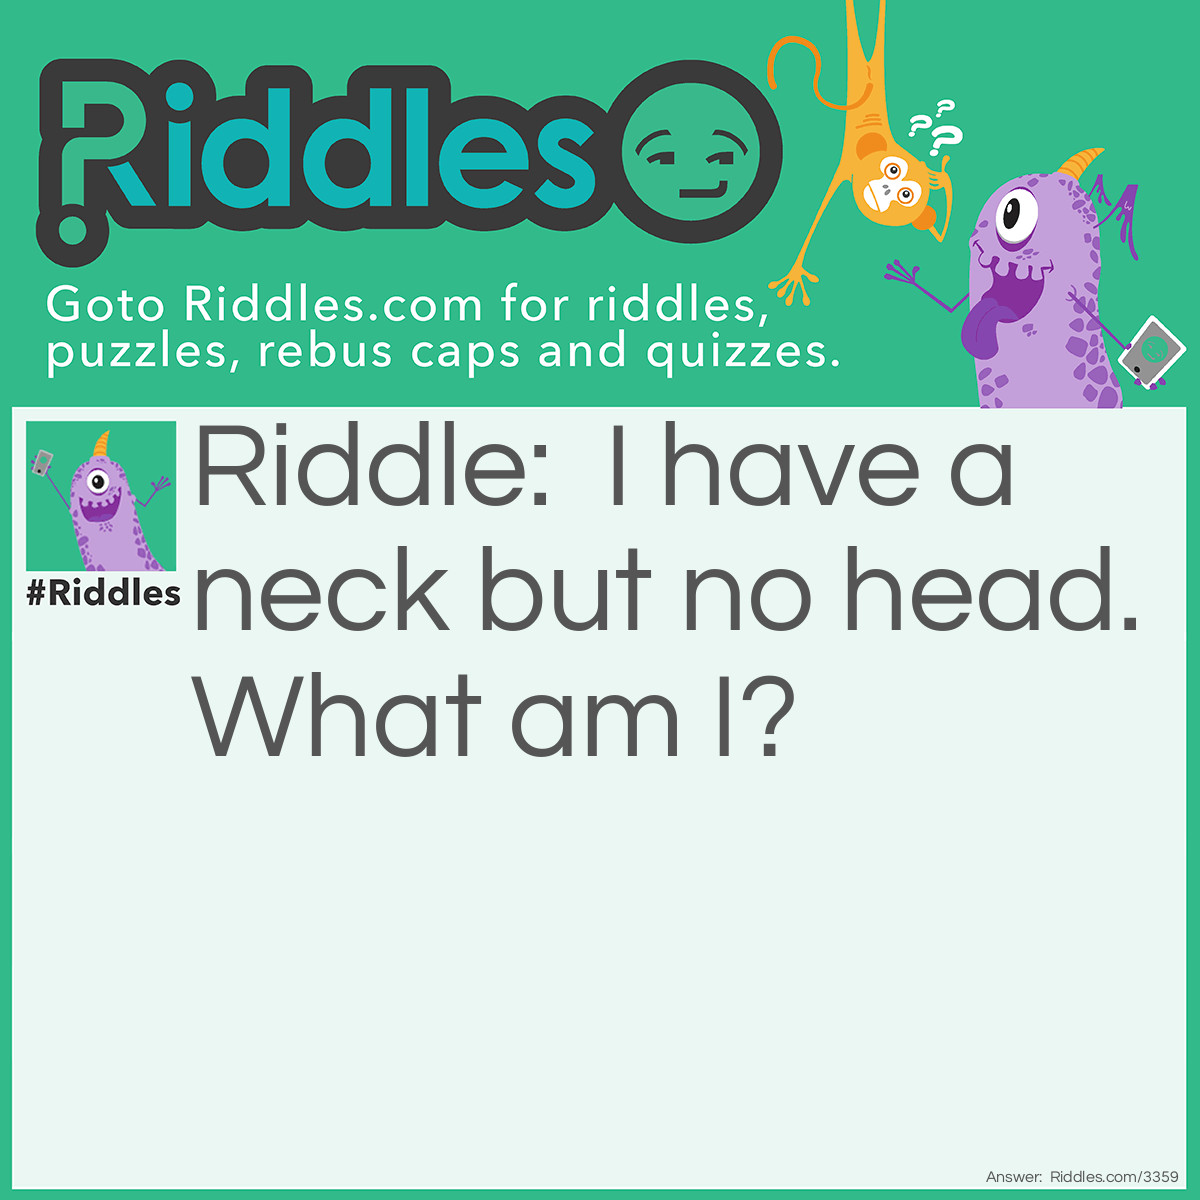 Riddle: I have a neck but no head.  What am I? Answer: A bottle.